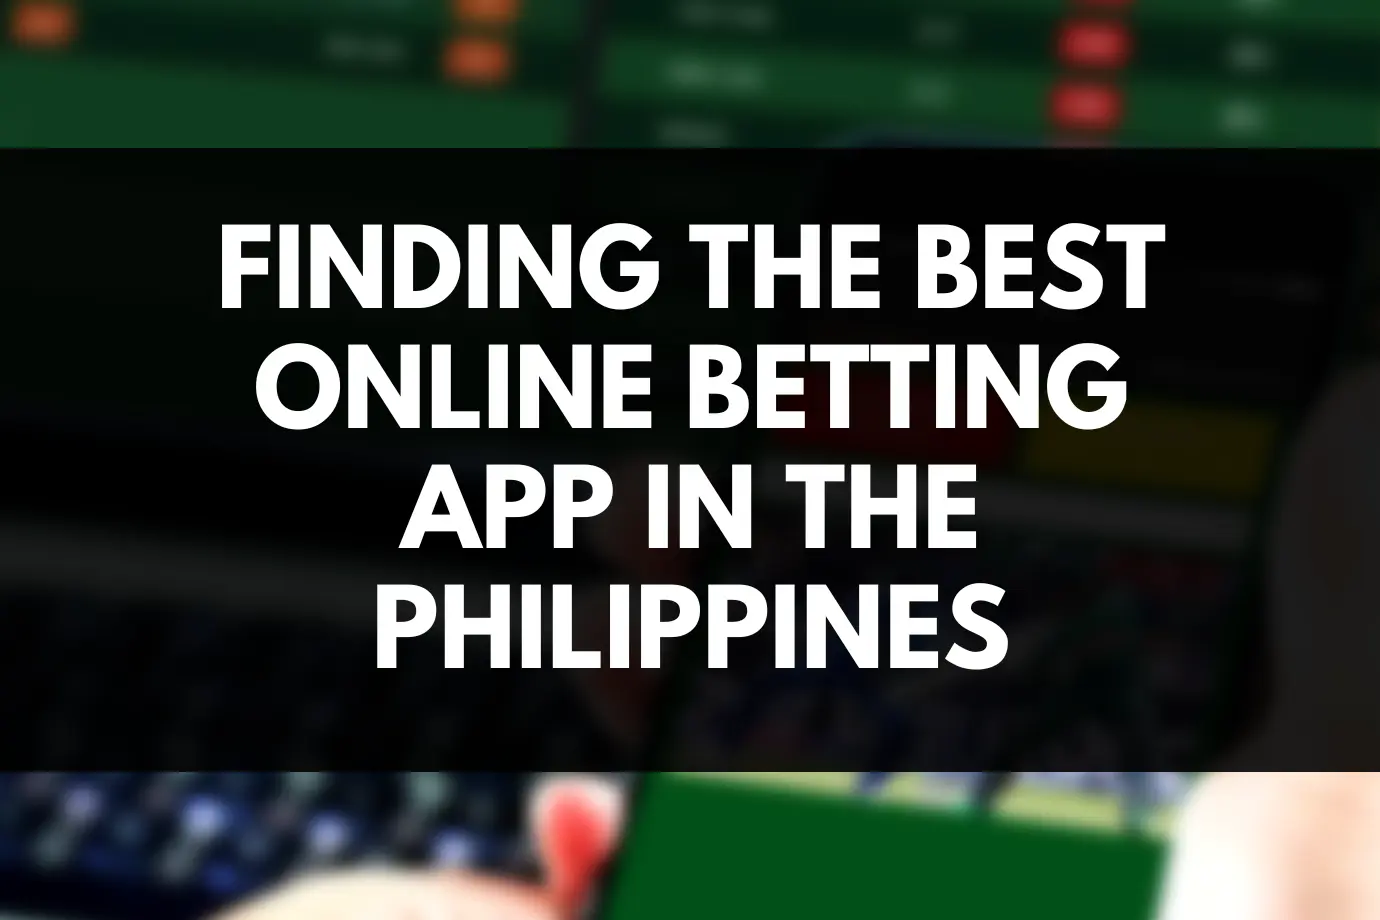 Finding the Best Online Betting App in the Philippines